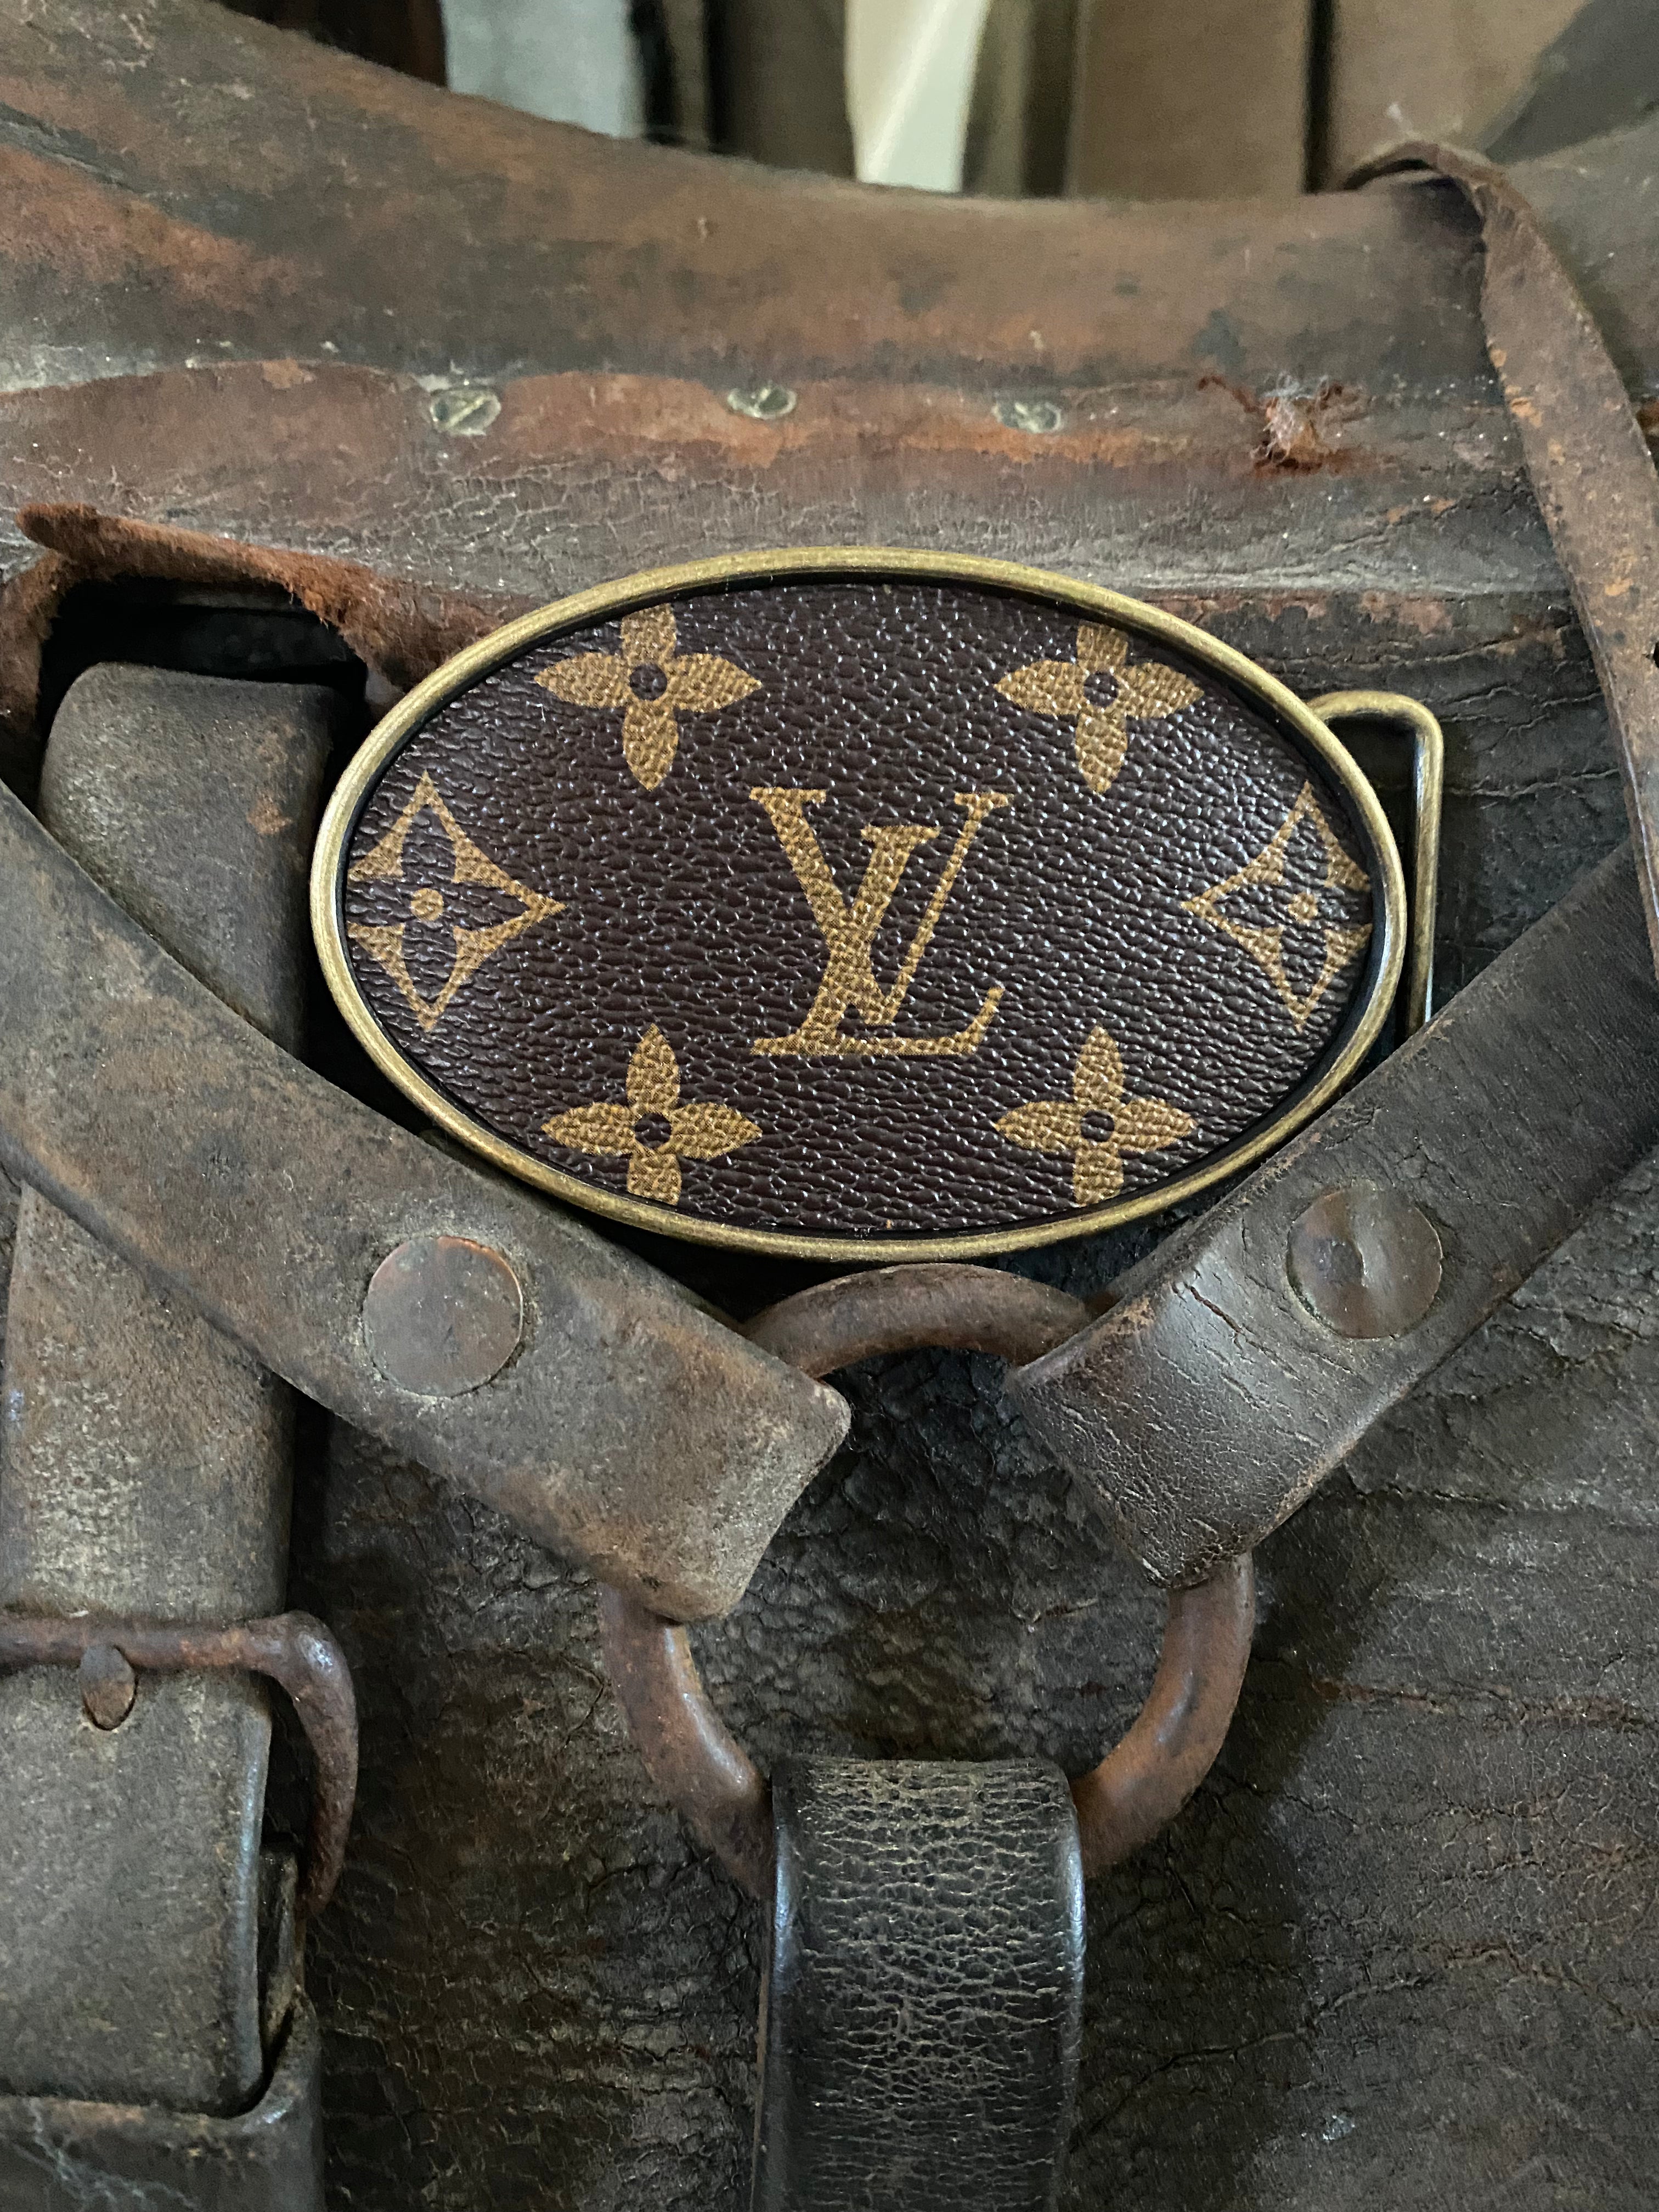 Adjustable Bum Bag PATCH of Lv- Smooth Leathers – Patches Of Upcycling